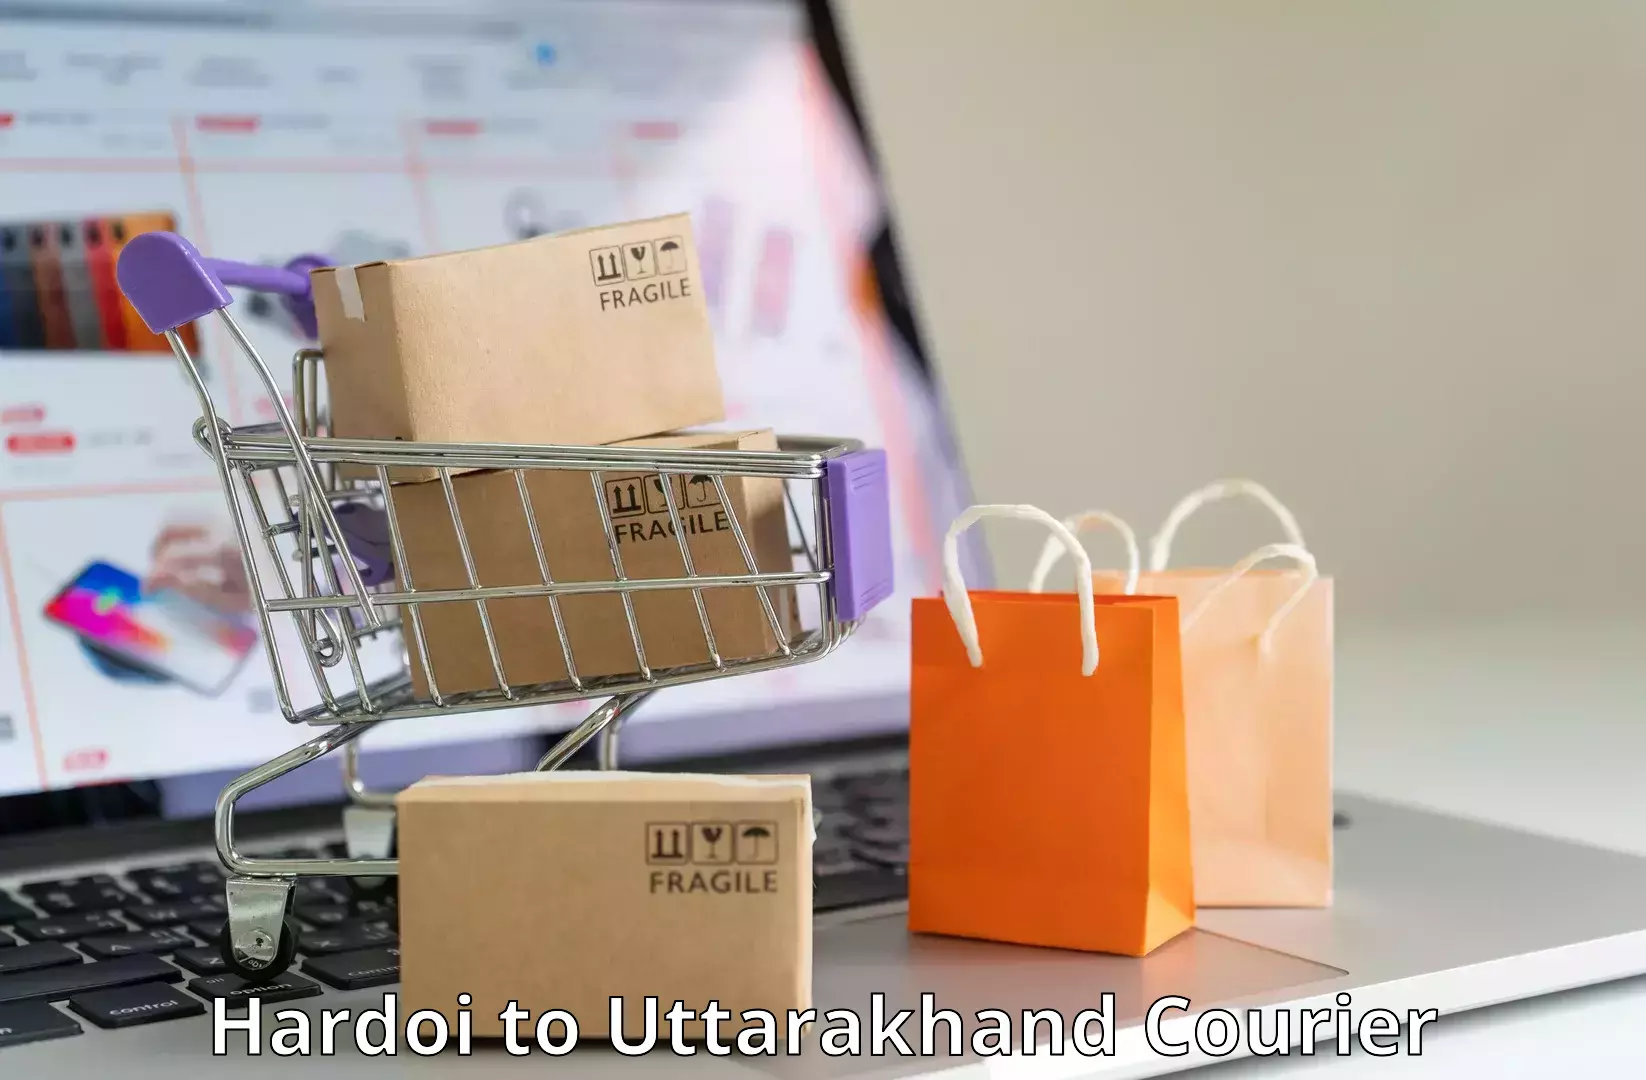 Cost-effective courier options Hardoi to Bageshwar